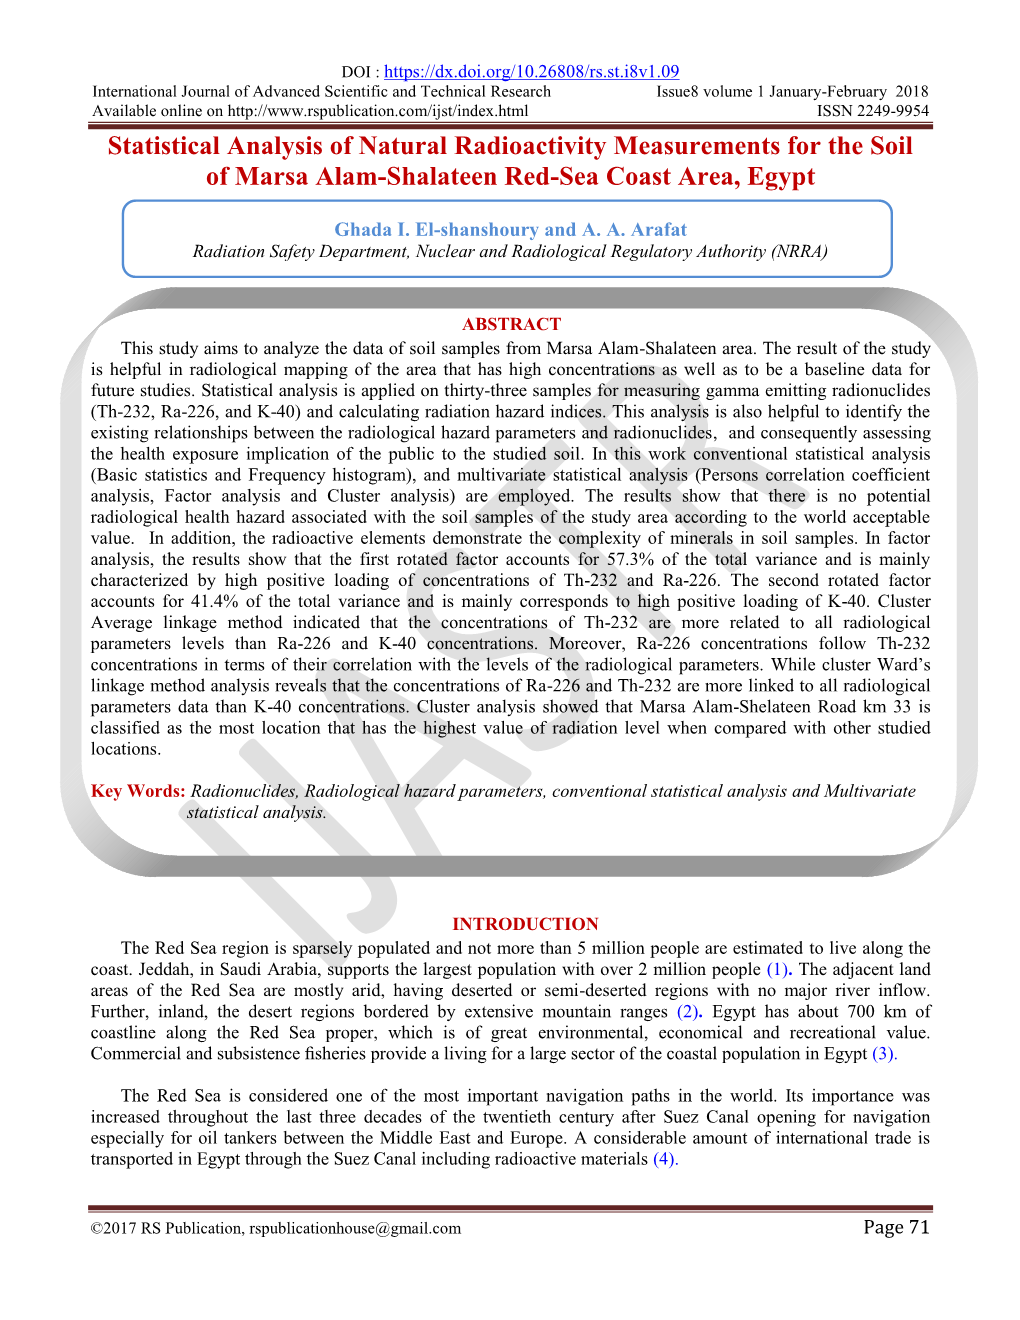 Statistical Analysis of Natural Radioactivity Measurements for the Soil of Marsa Alam-Shalateen Red-Sea Coast Area, Egypt